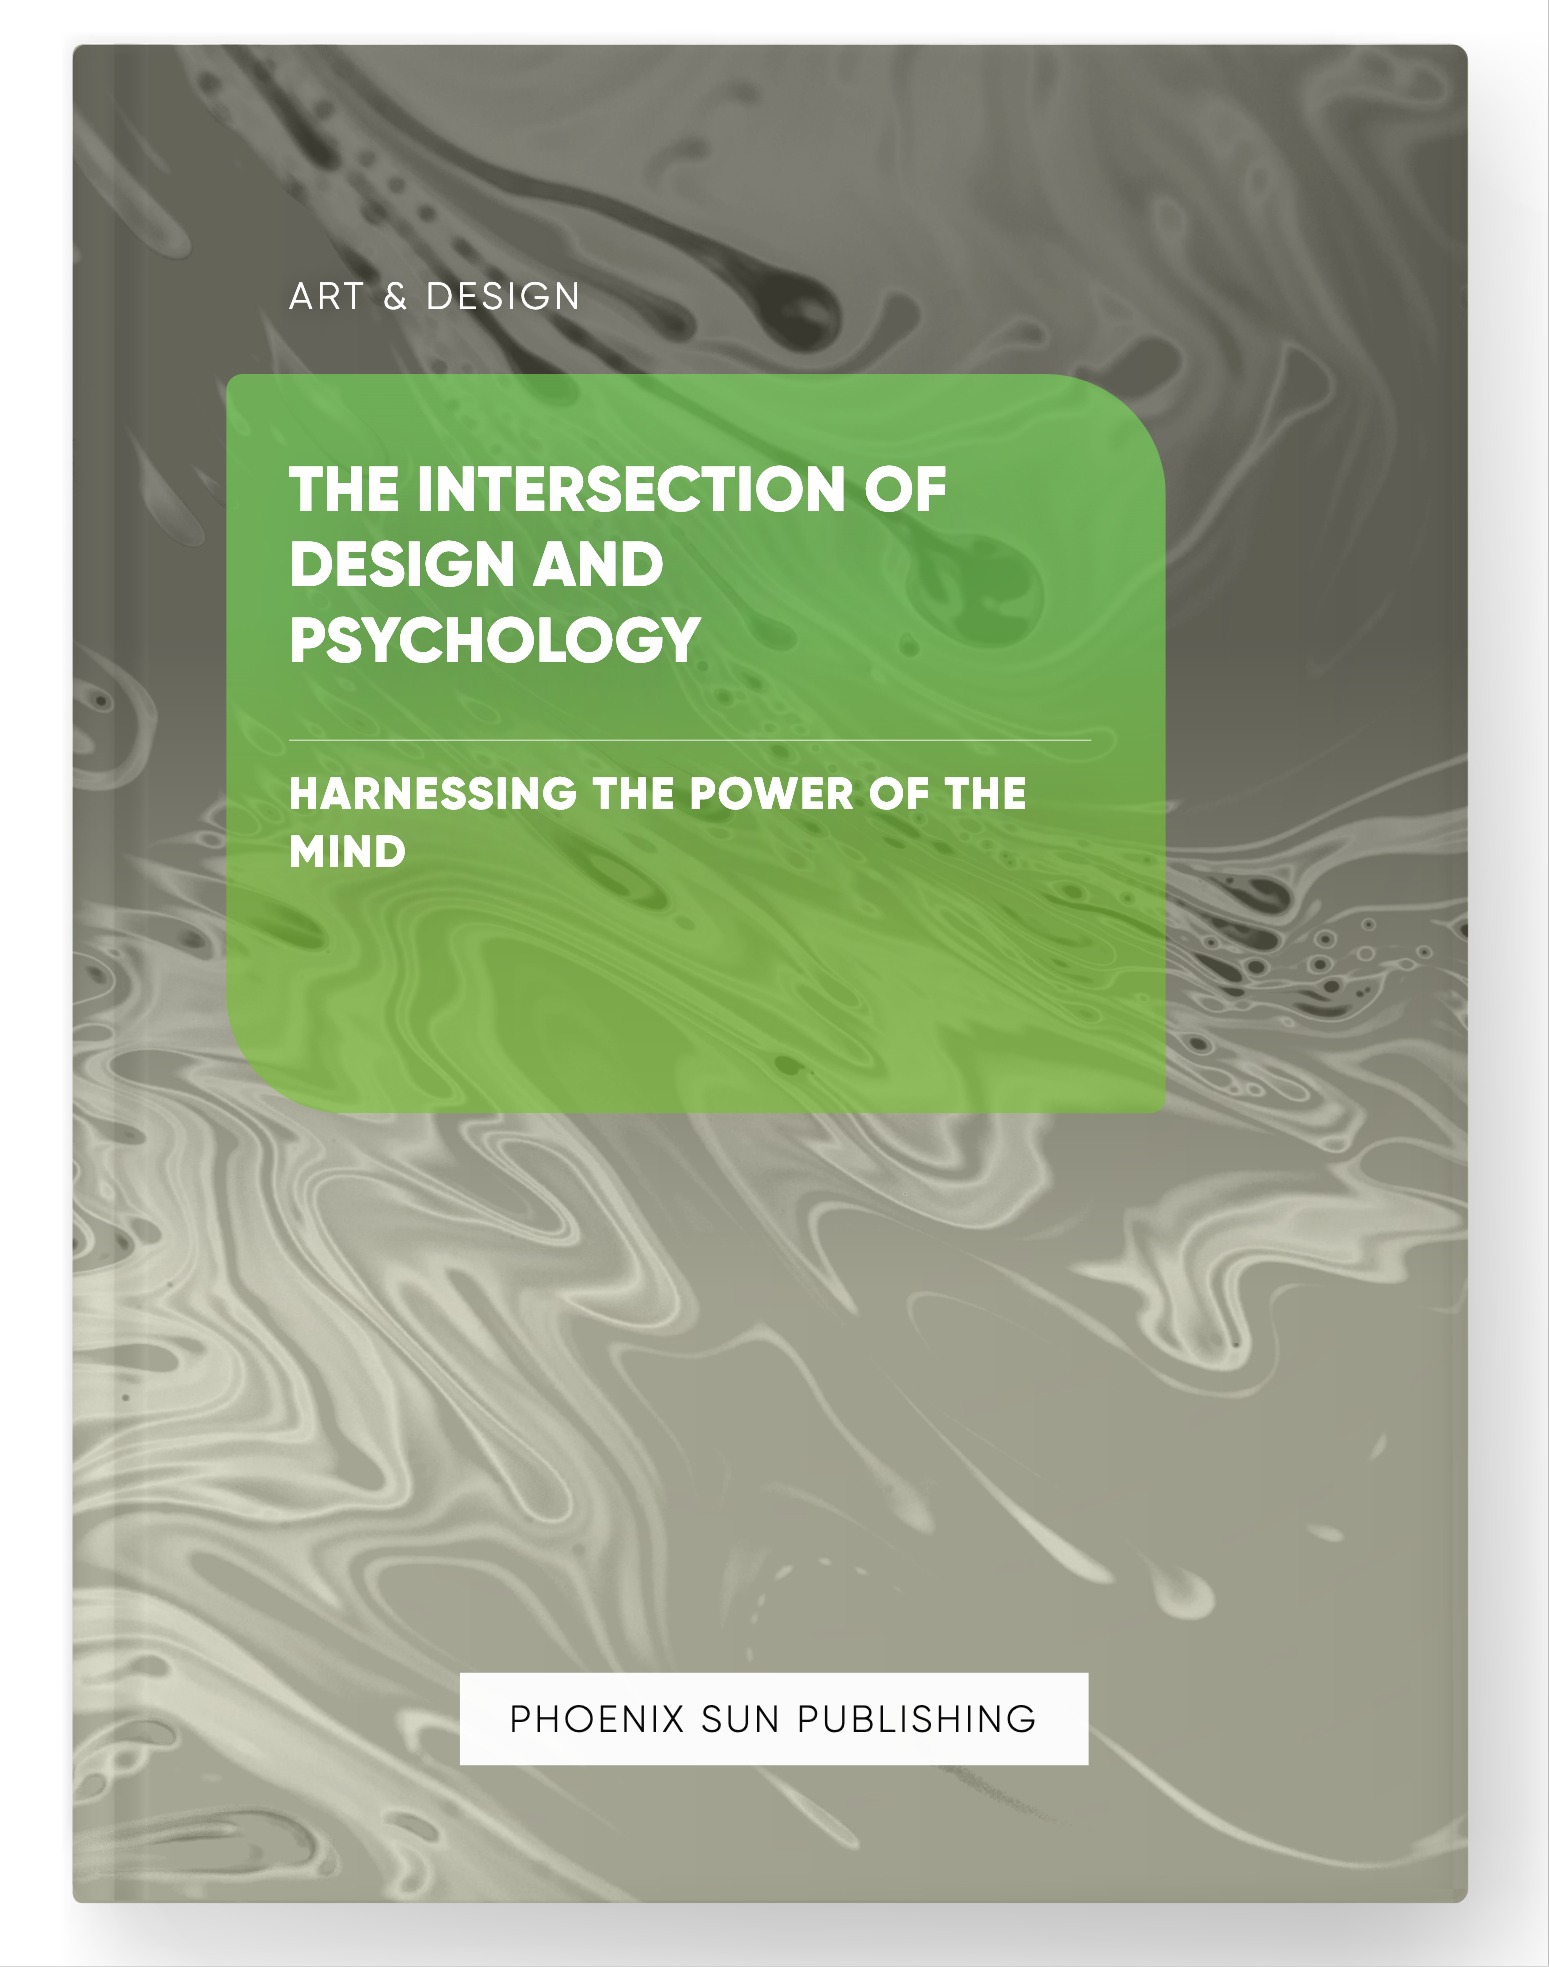 The Intersection of Design and Psychology – Harnessing the Power of the Mind